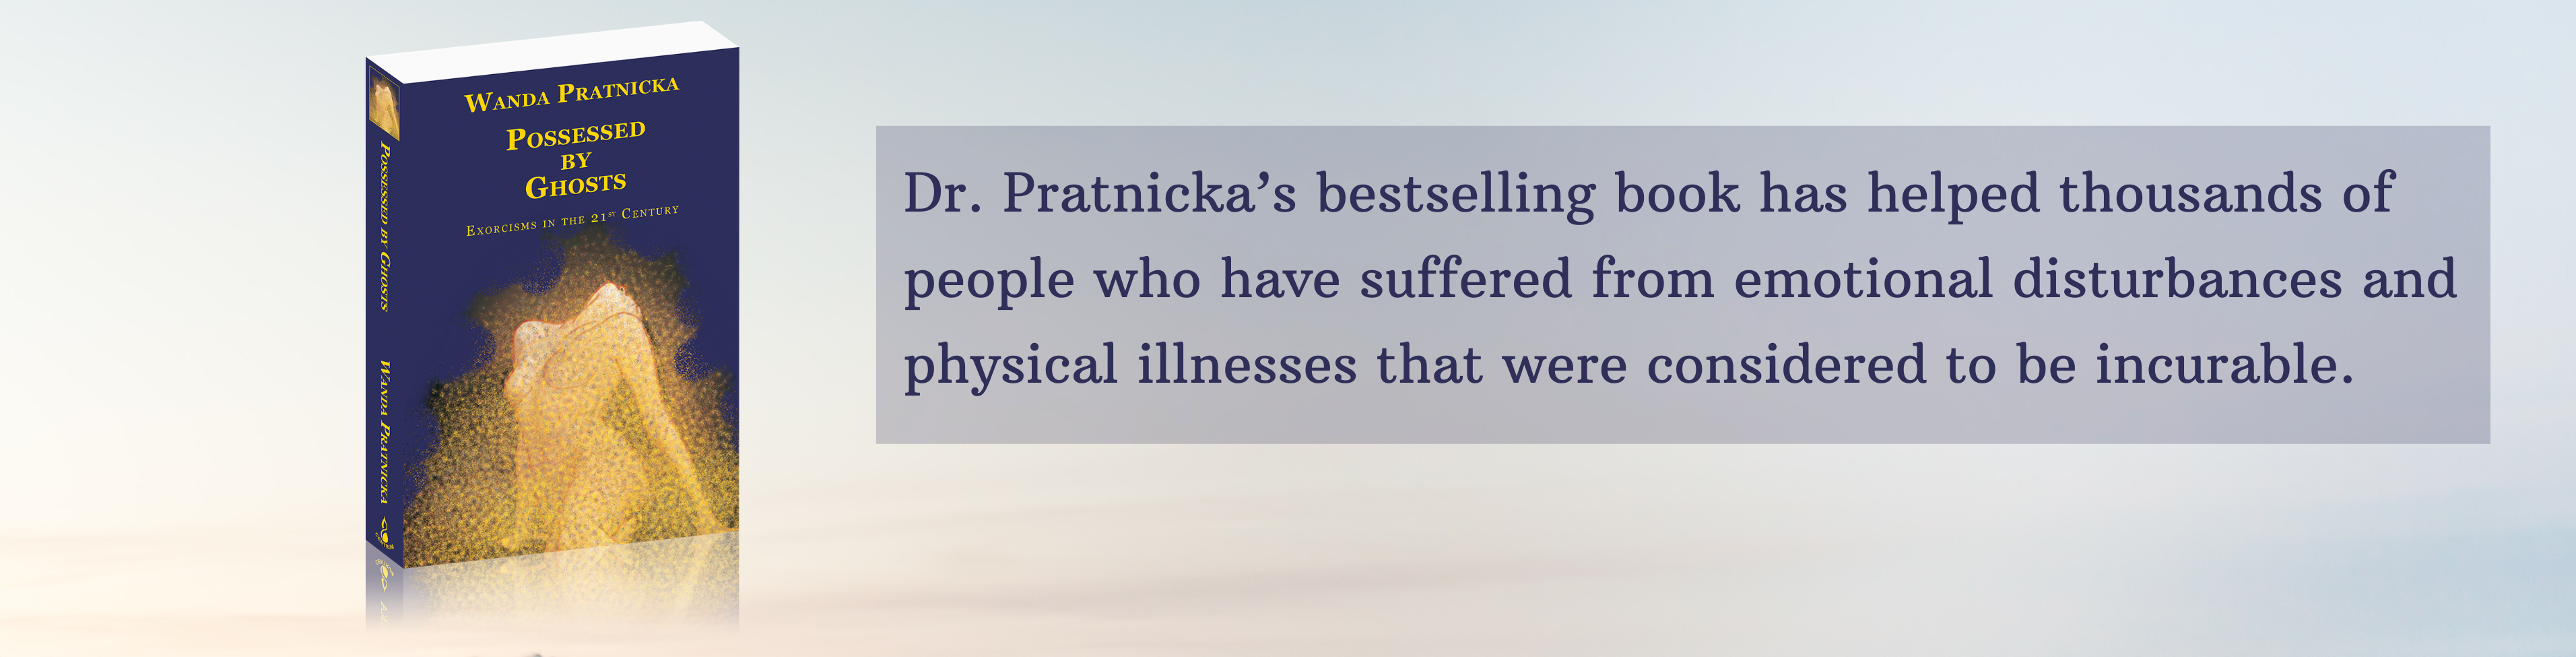 Dr2. Pratnickas bestselling book has helped thousands of people who have suffered from emotional disturbances and physical illnesses that were considered to be incurable. 7